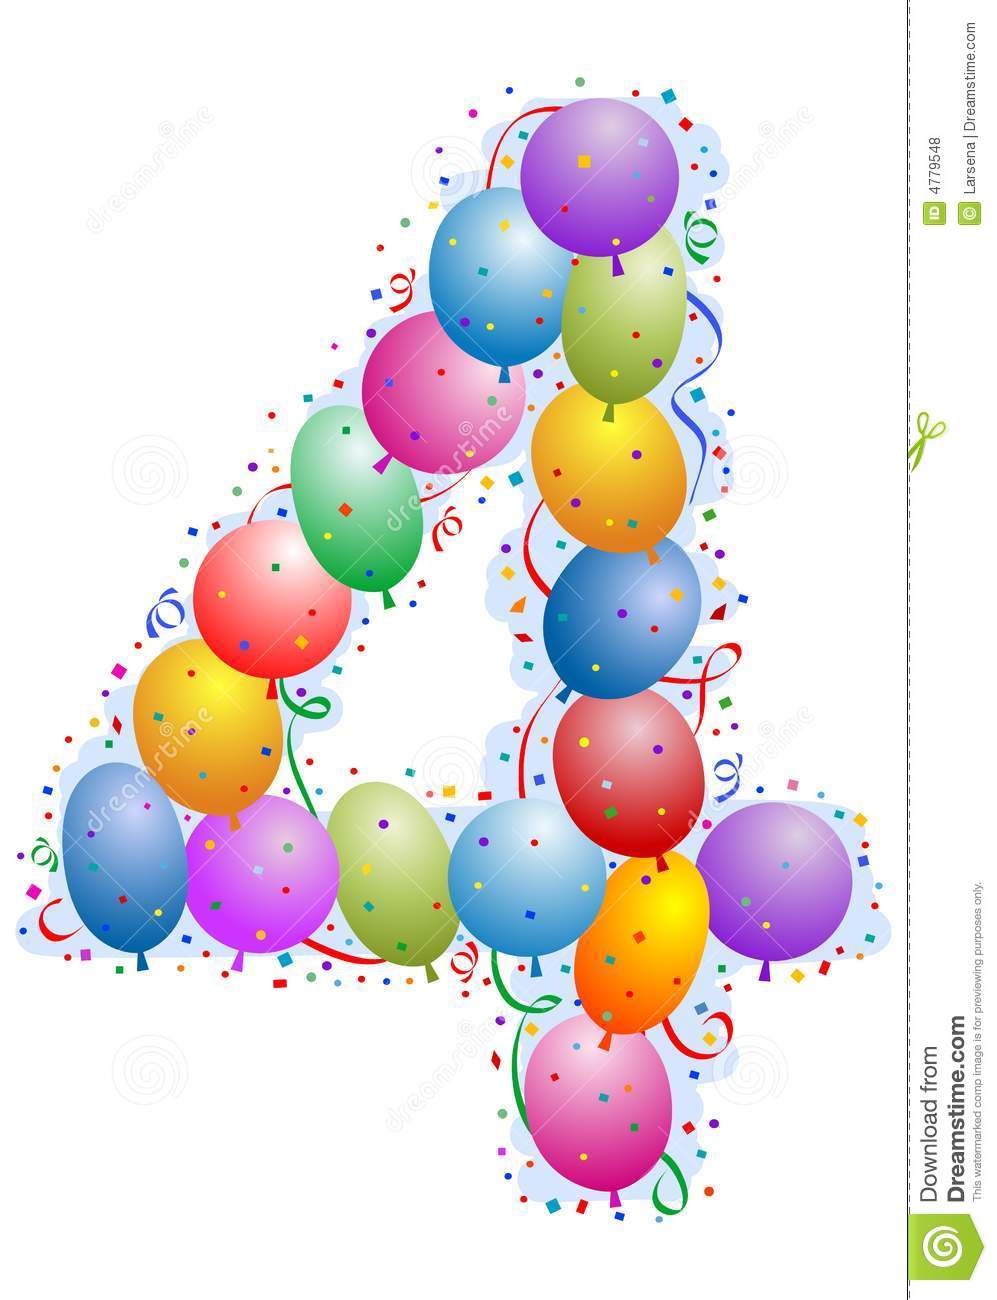 Party Balloons And Confetti   Clipart Panda   Free Clipart Images